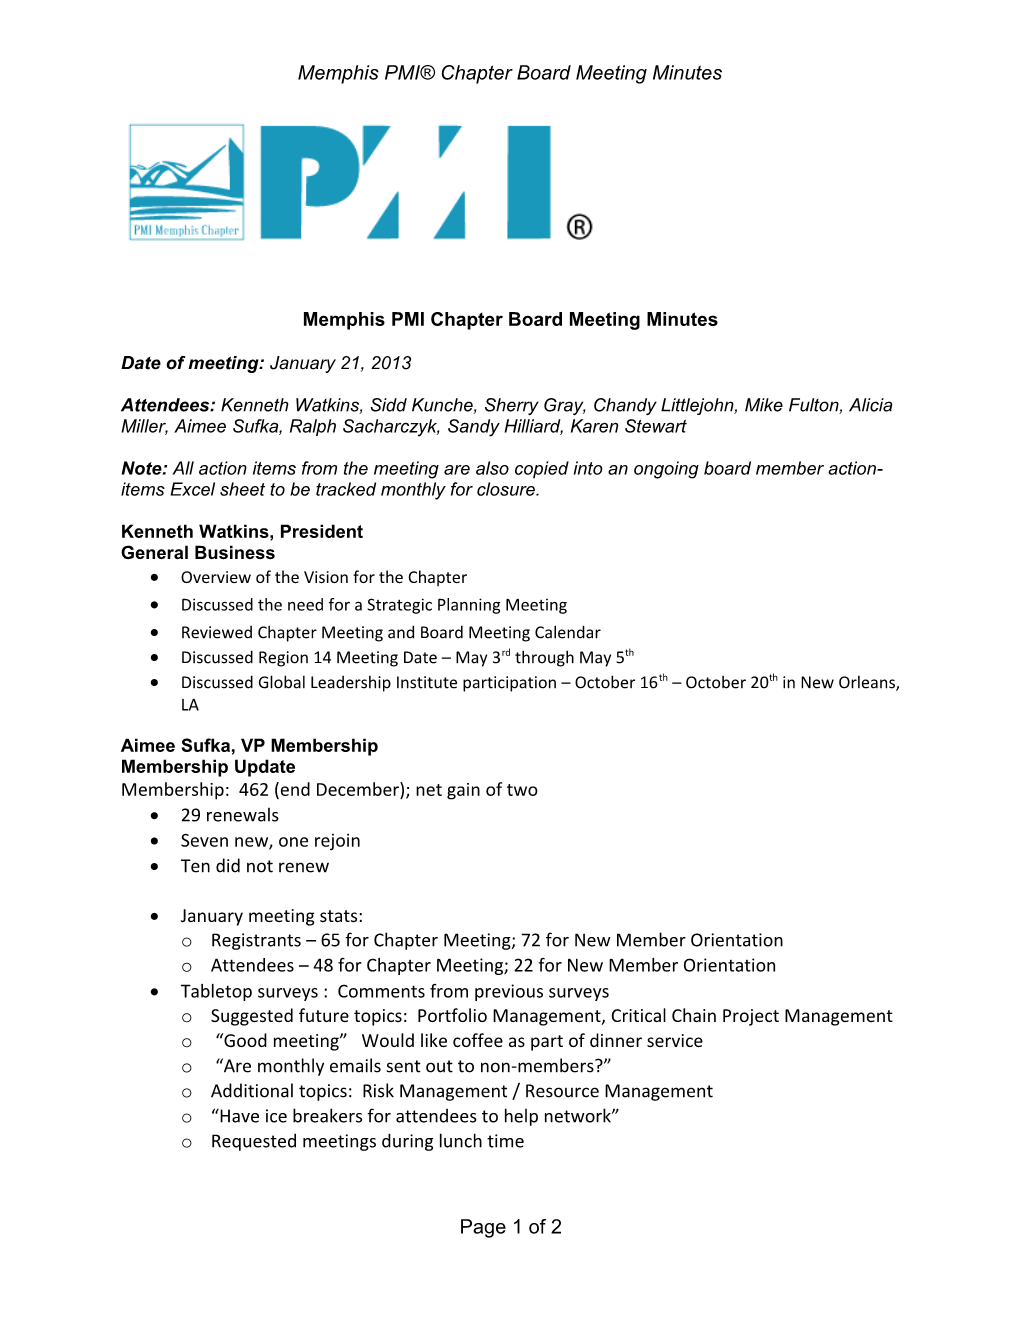 Memphis PMI Chapter Board Meeting Minutes